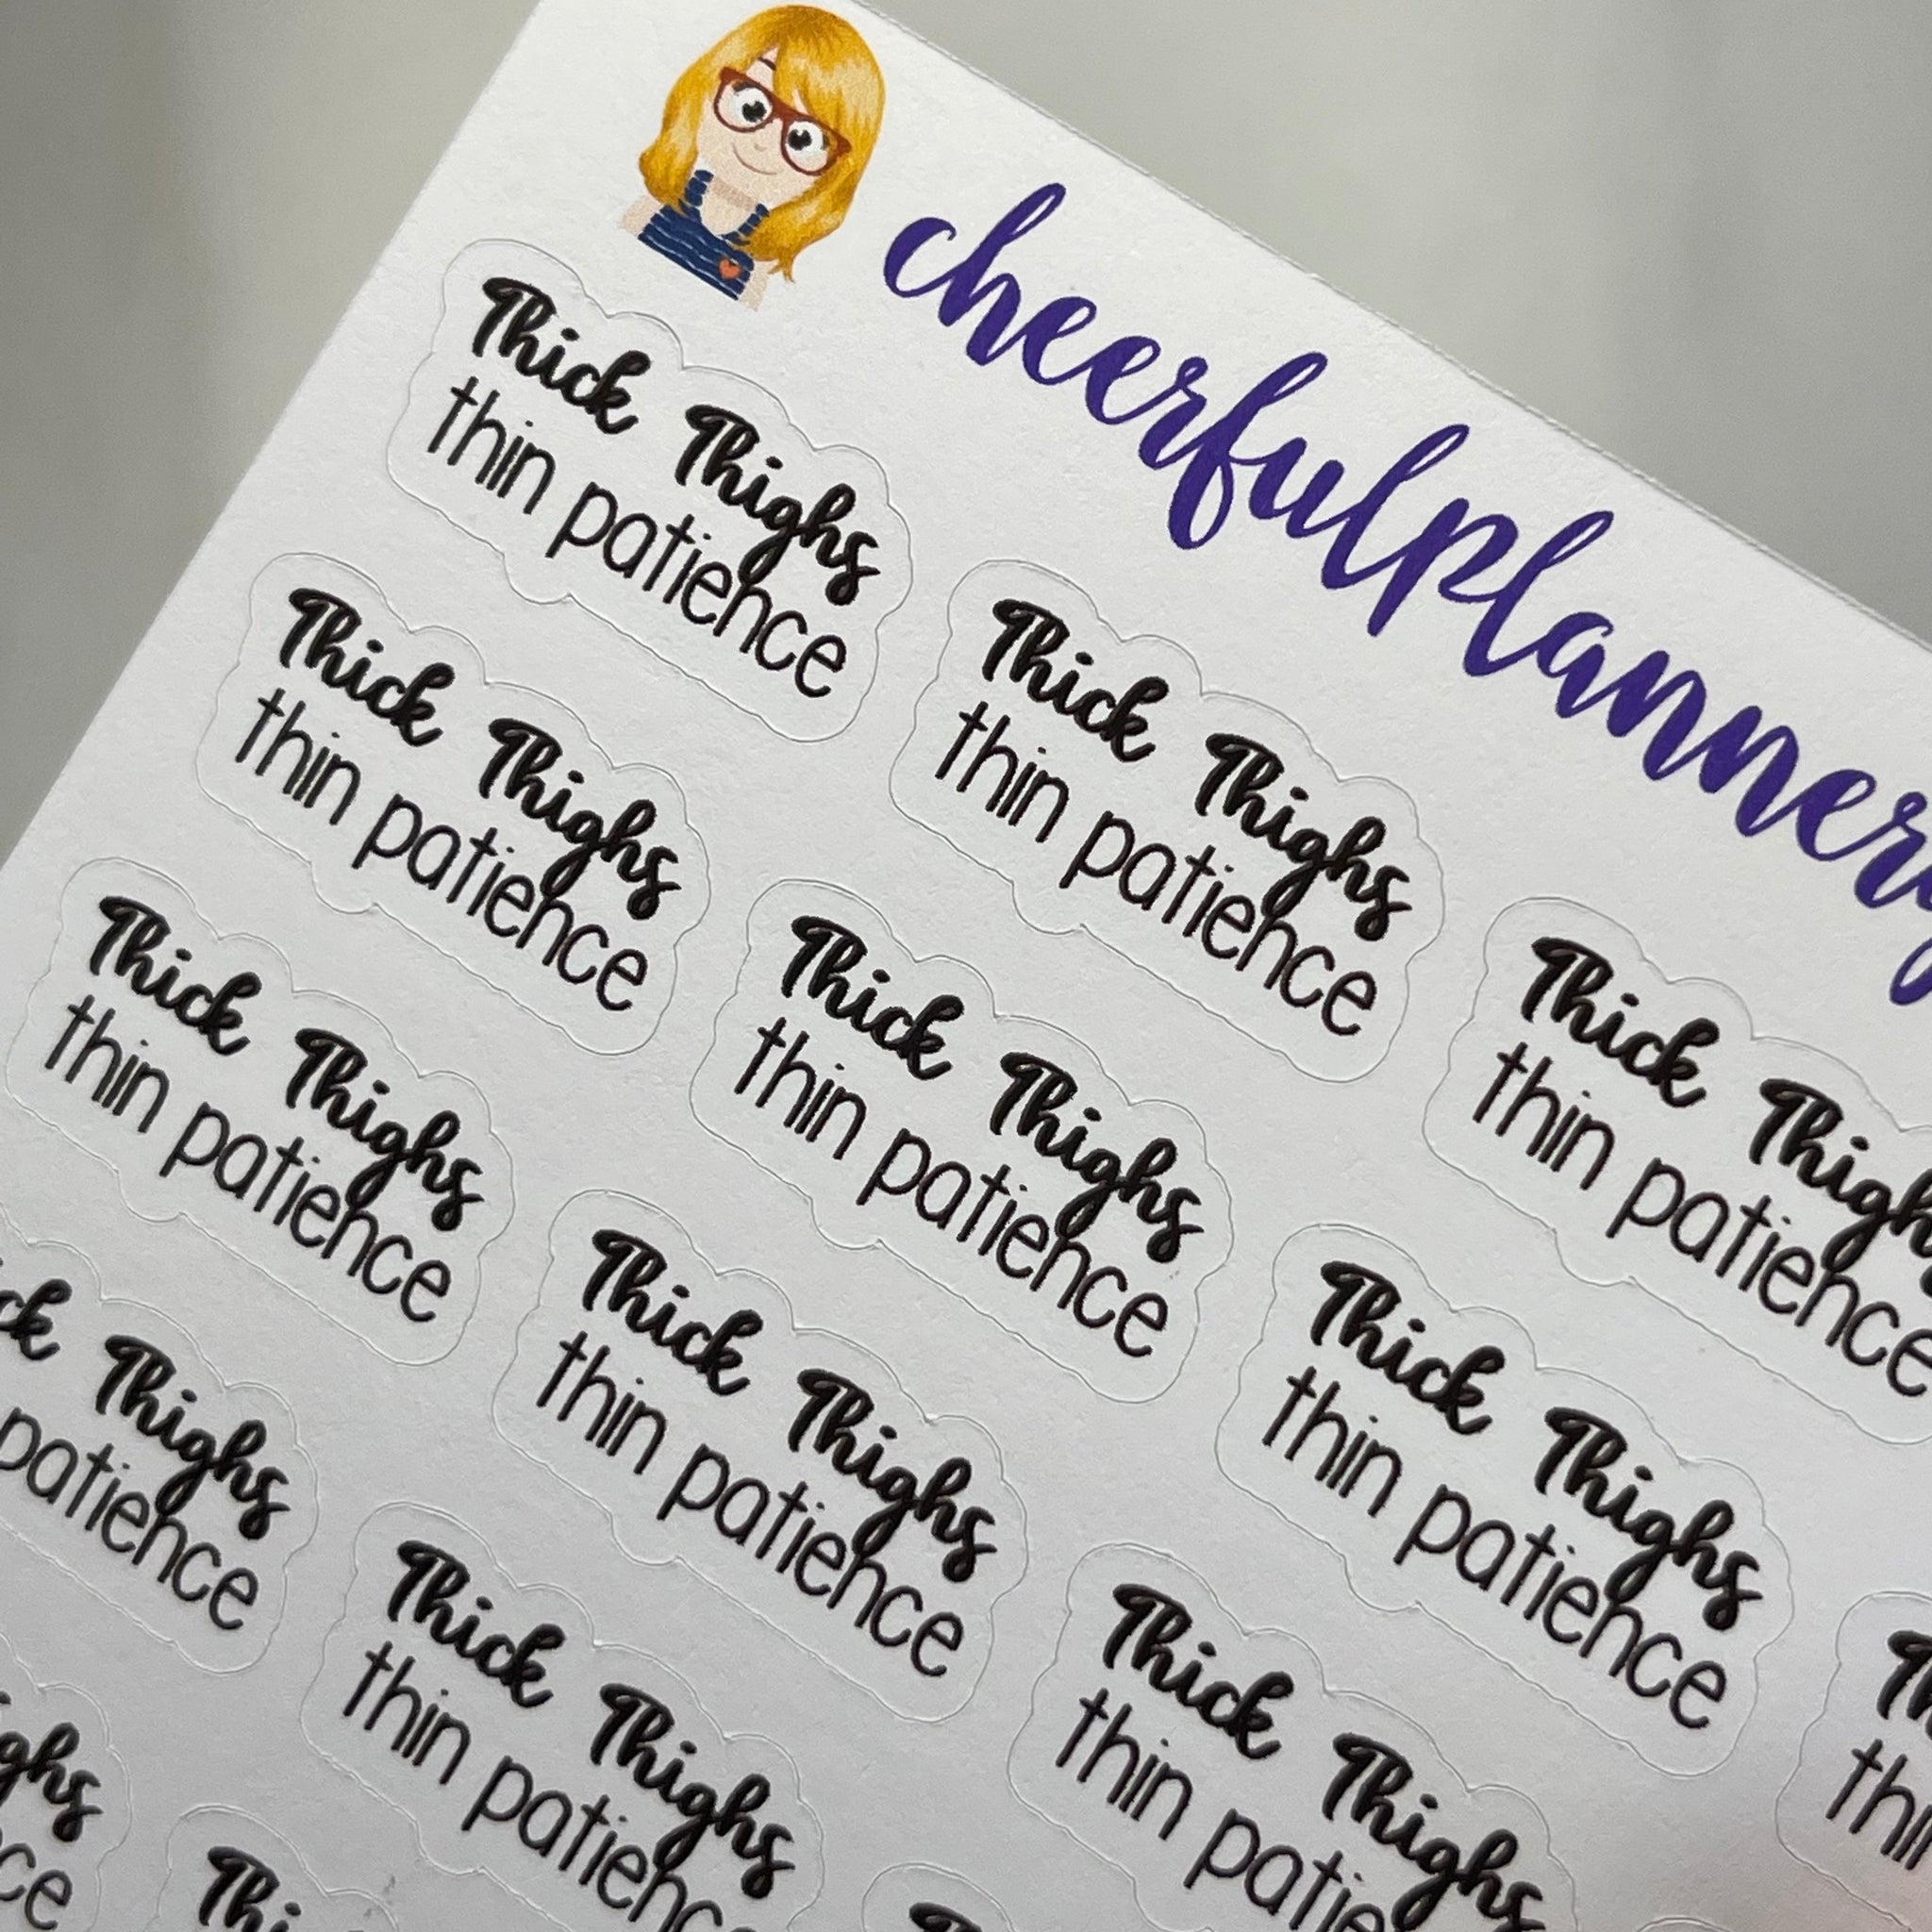 Thick Thighs Thin Patience Cursive Script Planner Stickers